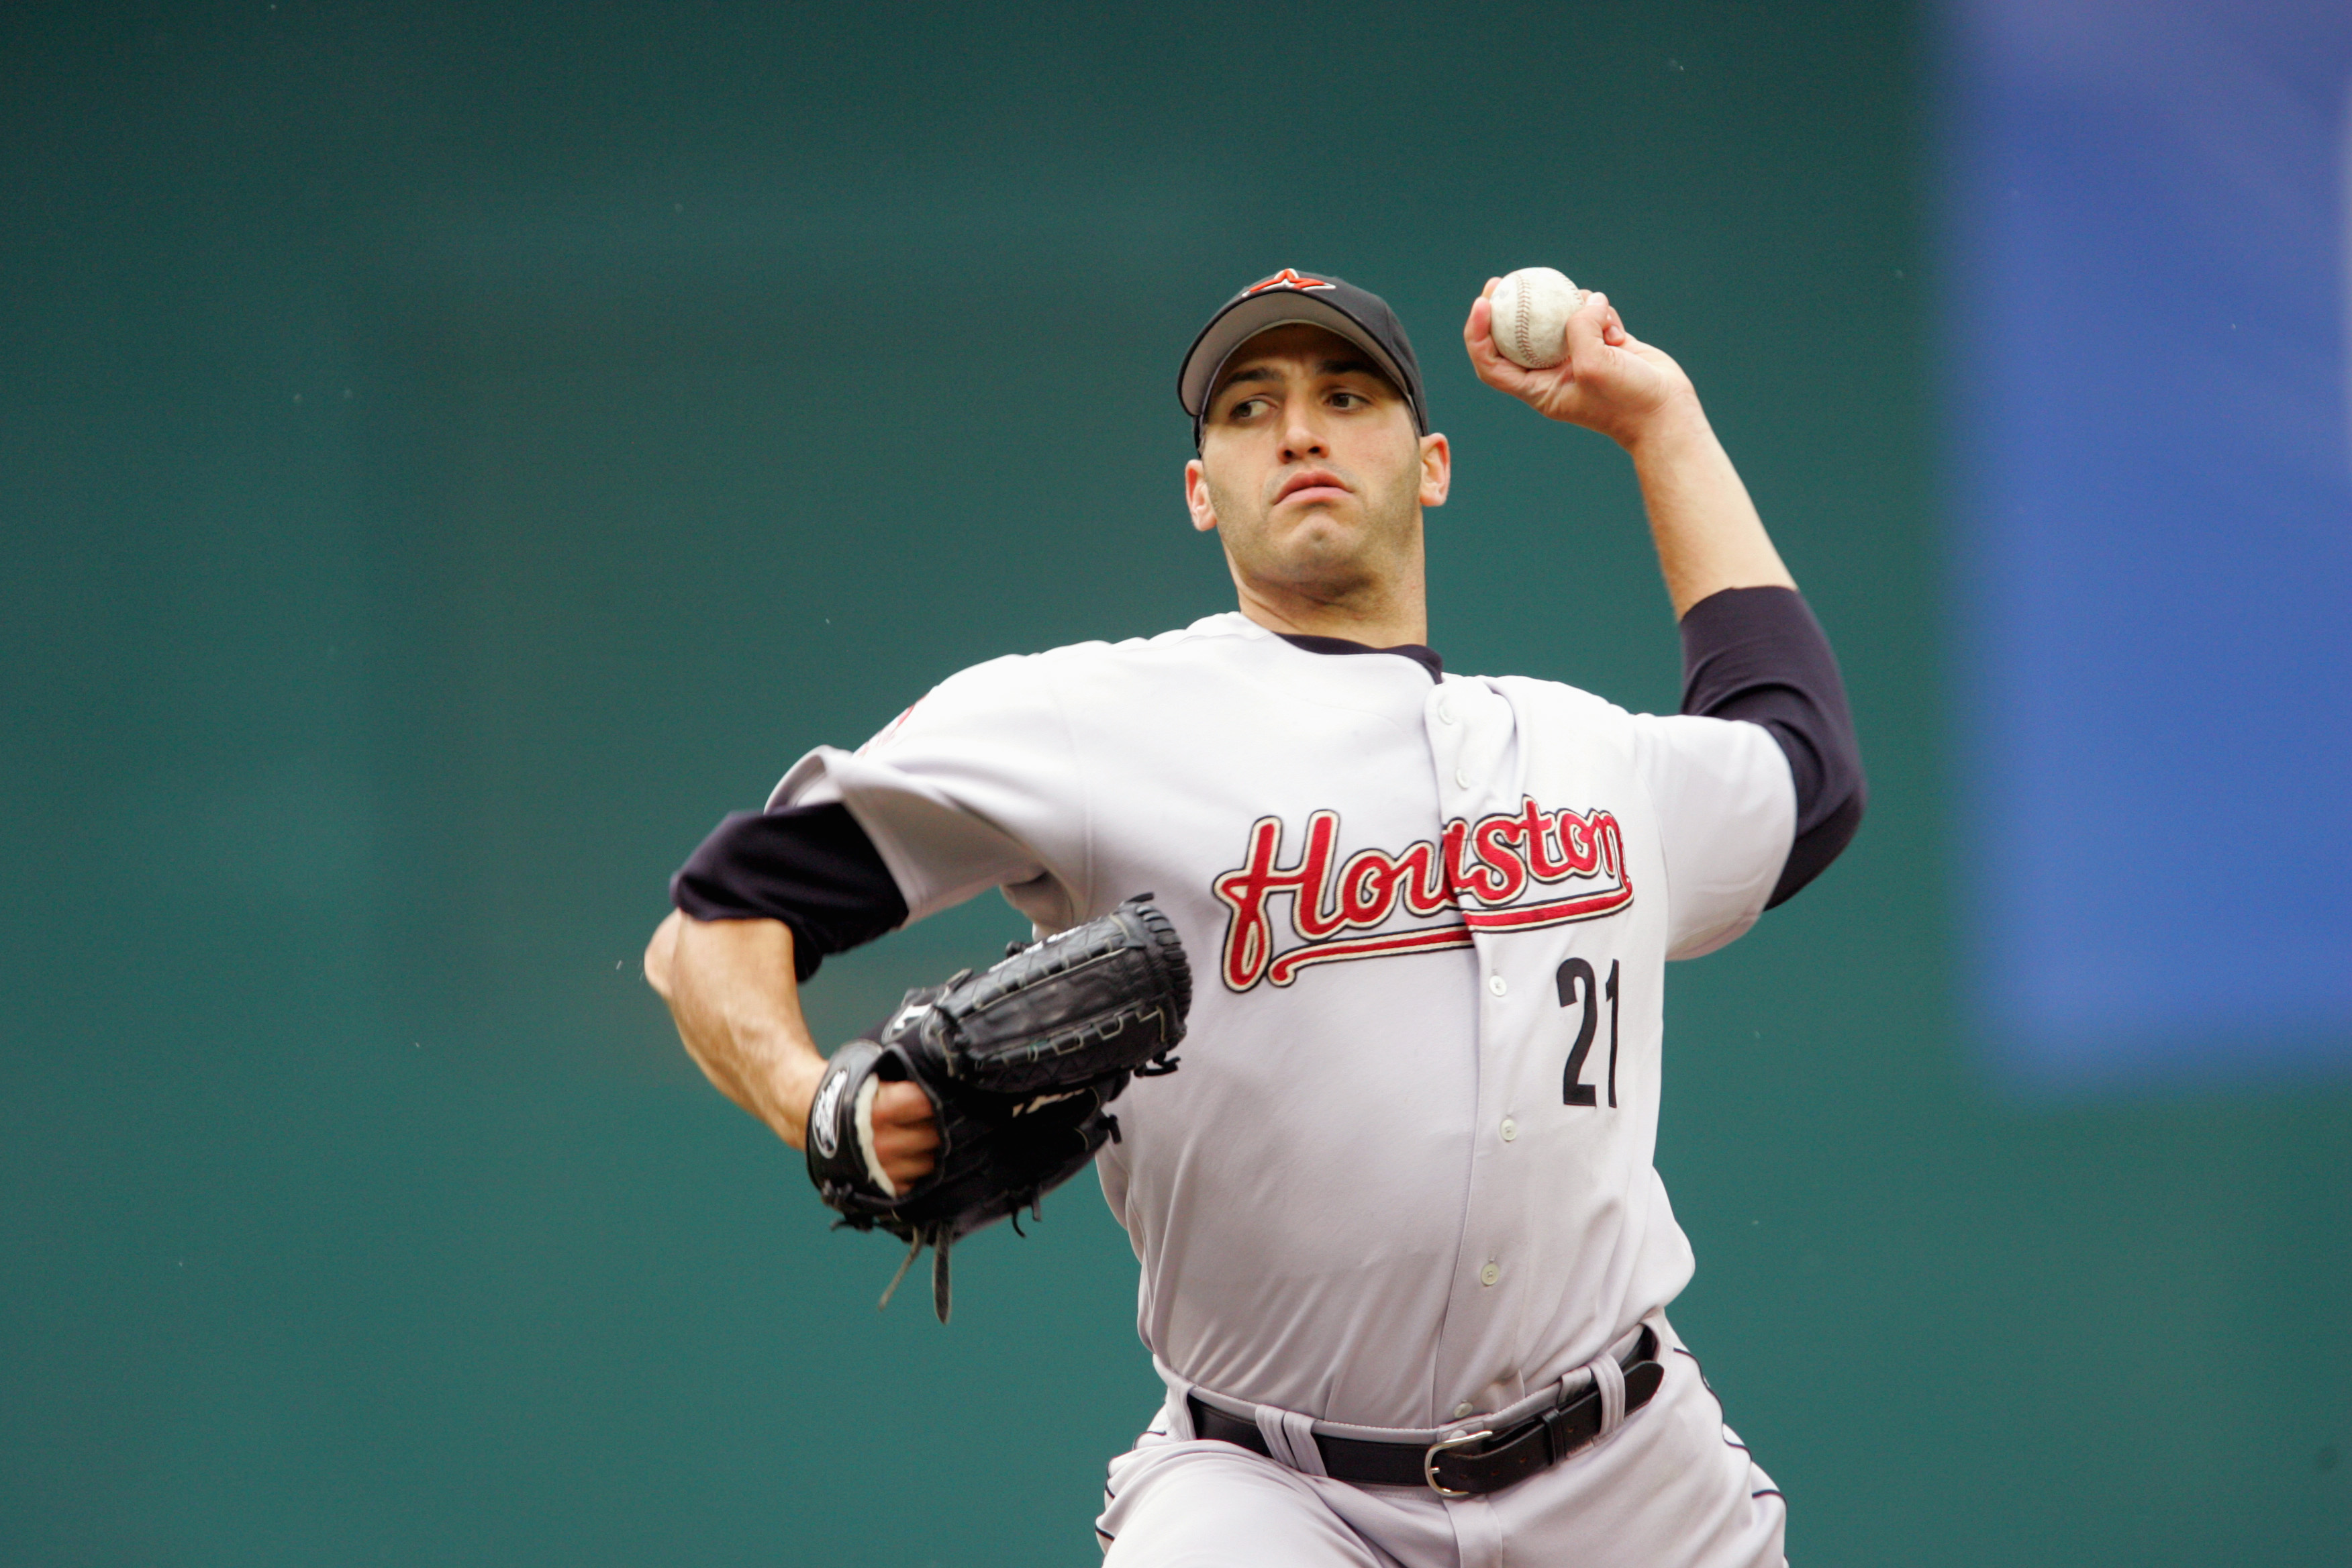 WASHINGTON - MAY 25:  Andy Pettitte #21 of the Houston Astros pitches against the Washington Nationals on May 25, 2006 at RFK Stadium in Washington, DC. The Nationals defeated the Astros 8-5. (Photo by Jamie Squire/Getty Images)